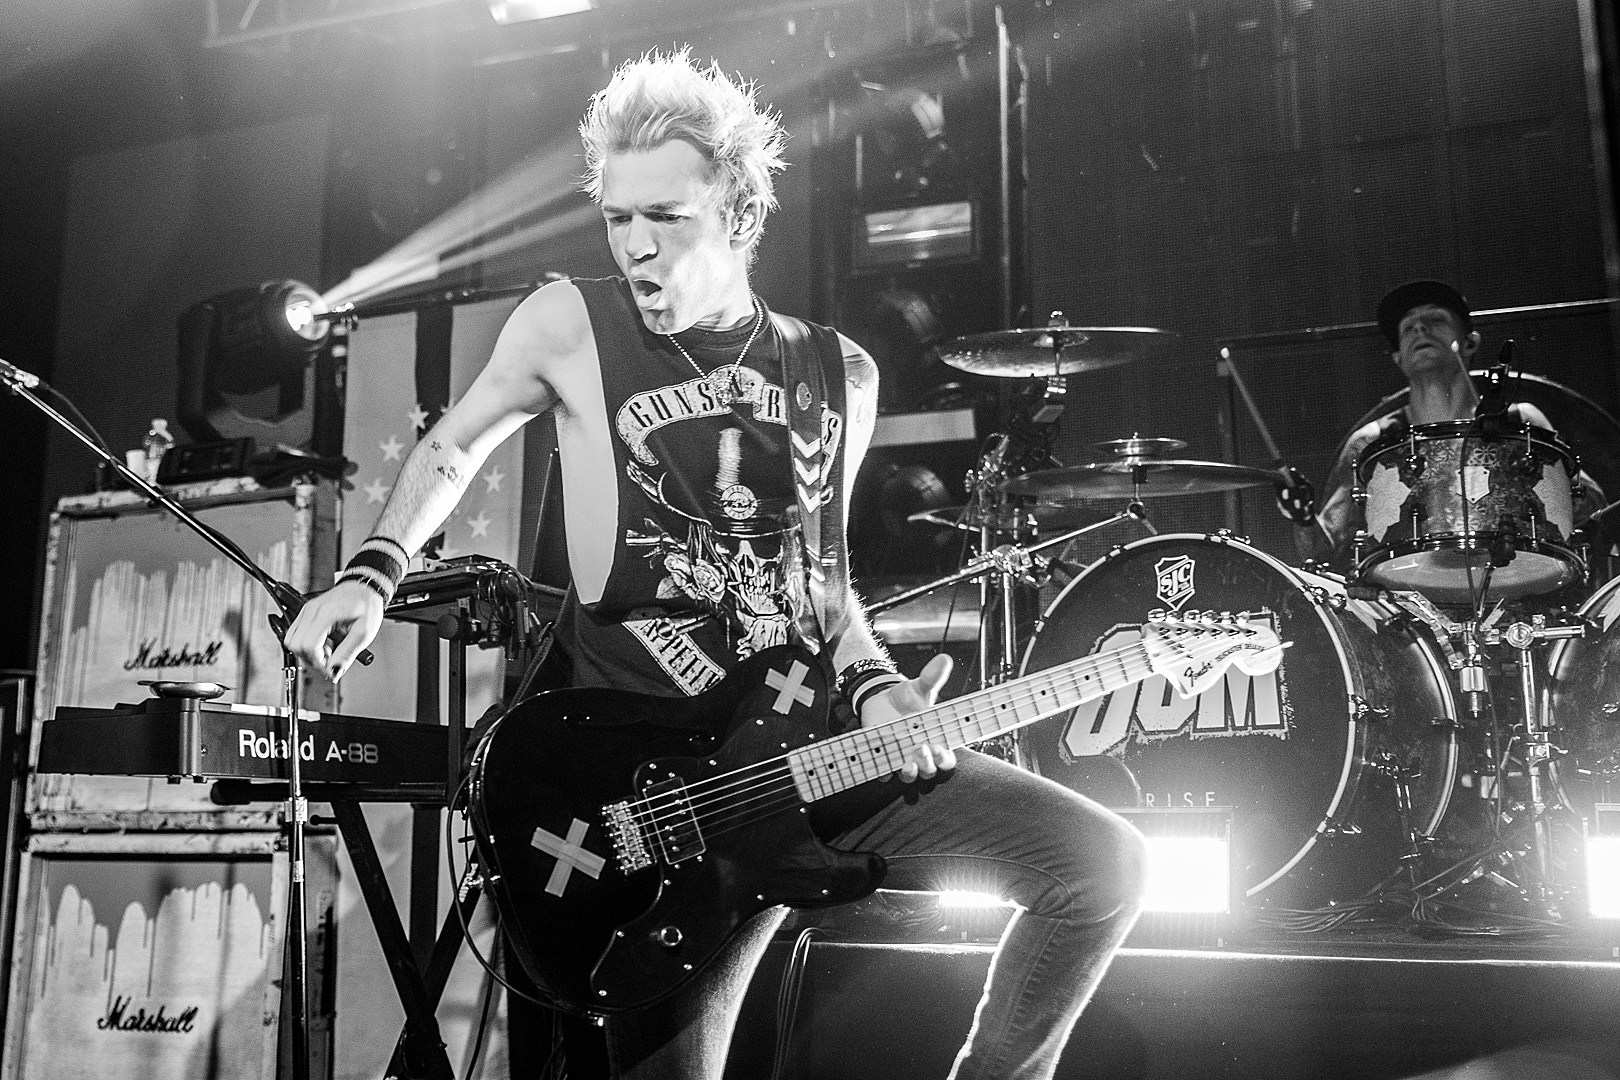 For Sum 41's Deryck Whibley, 'The Live Show is Everything'